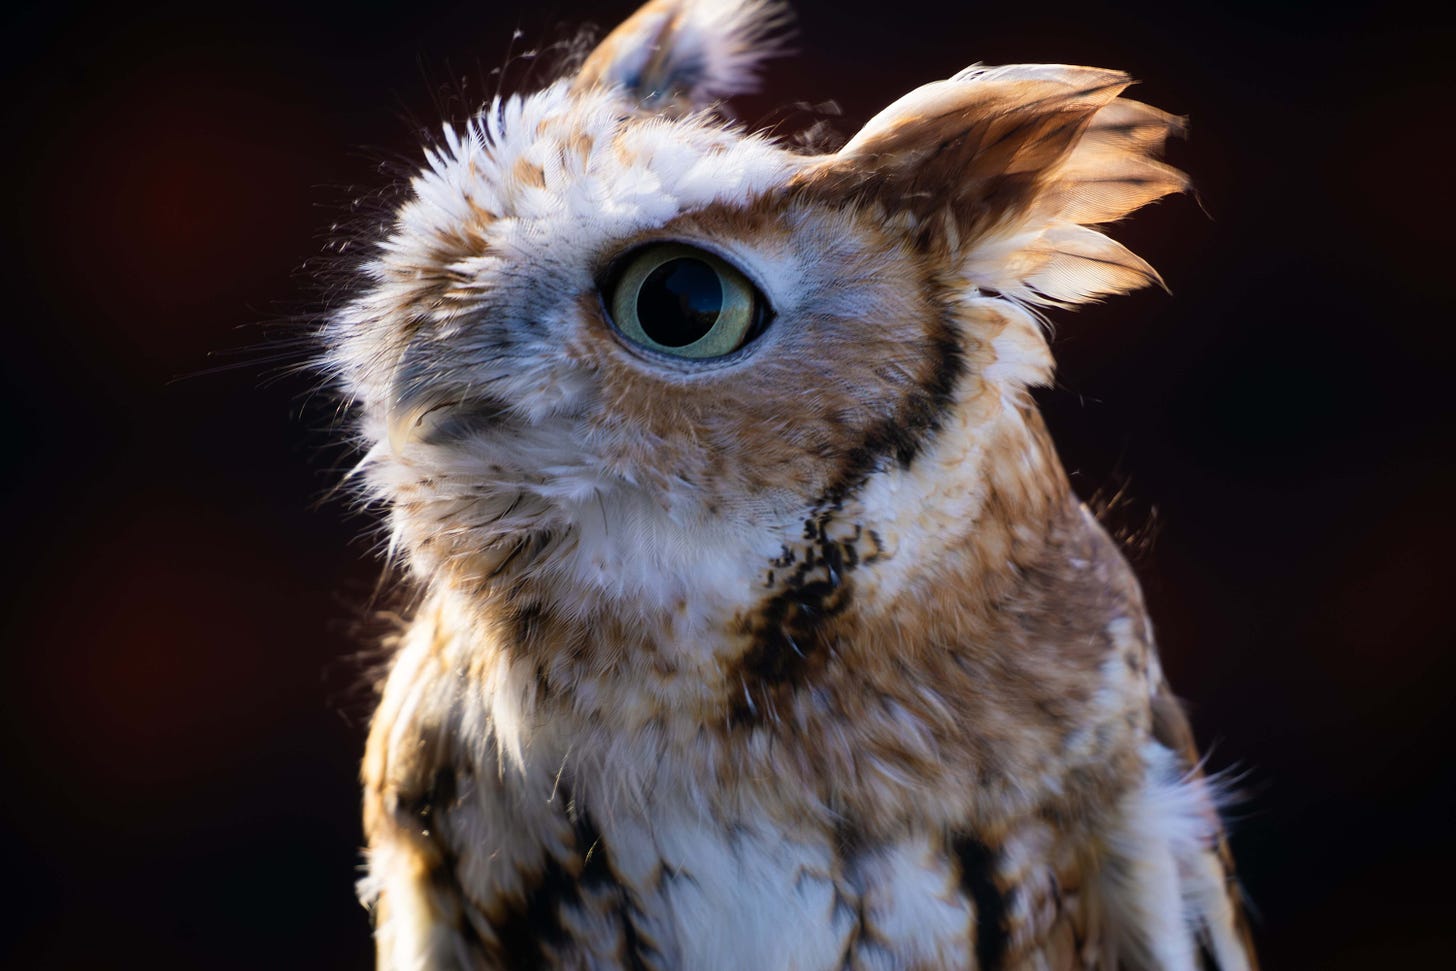 A red morph Eastern screech owl turns her head and opens her beak inquisitively against a black background